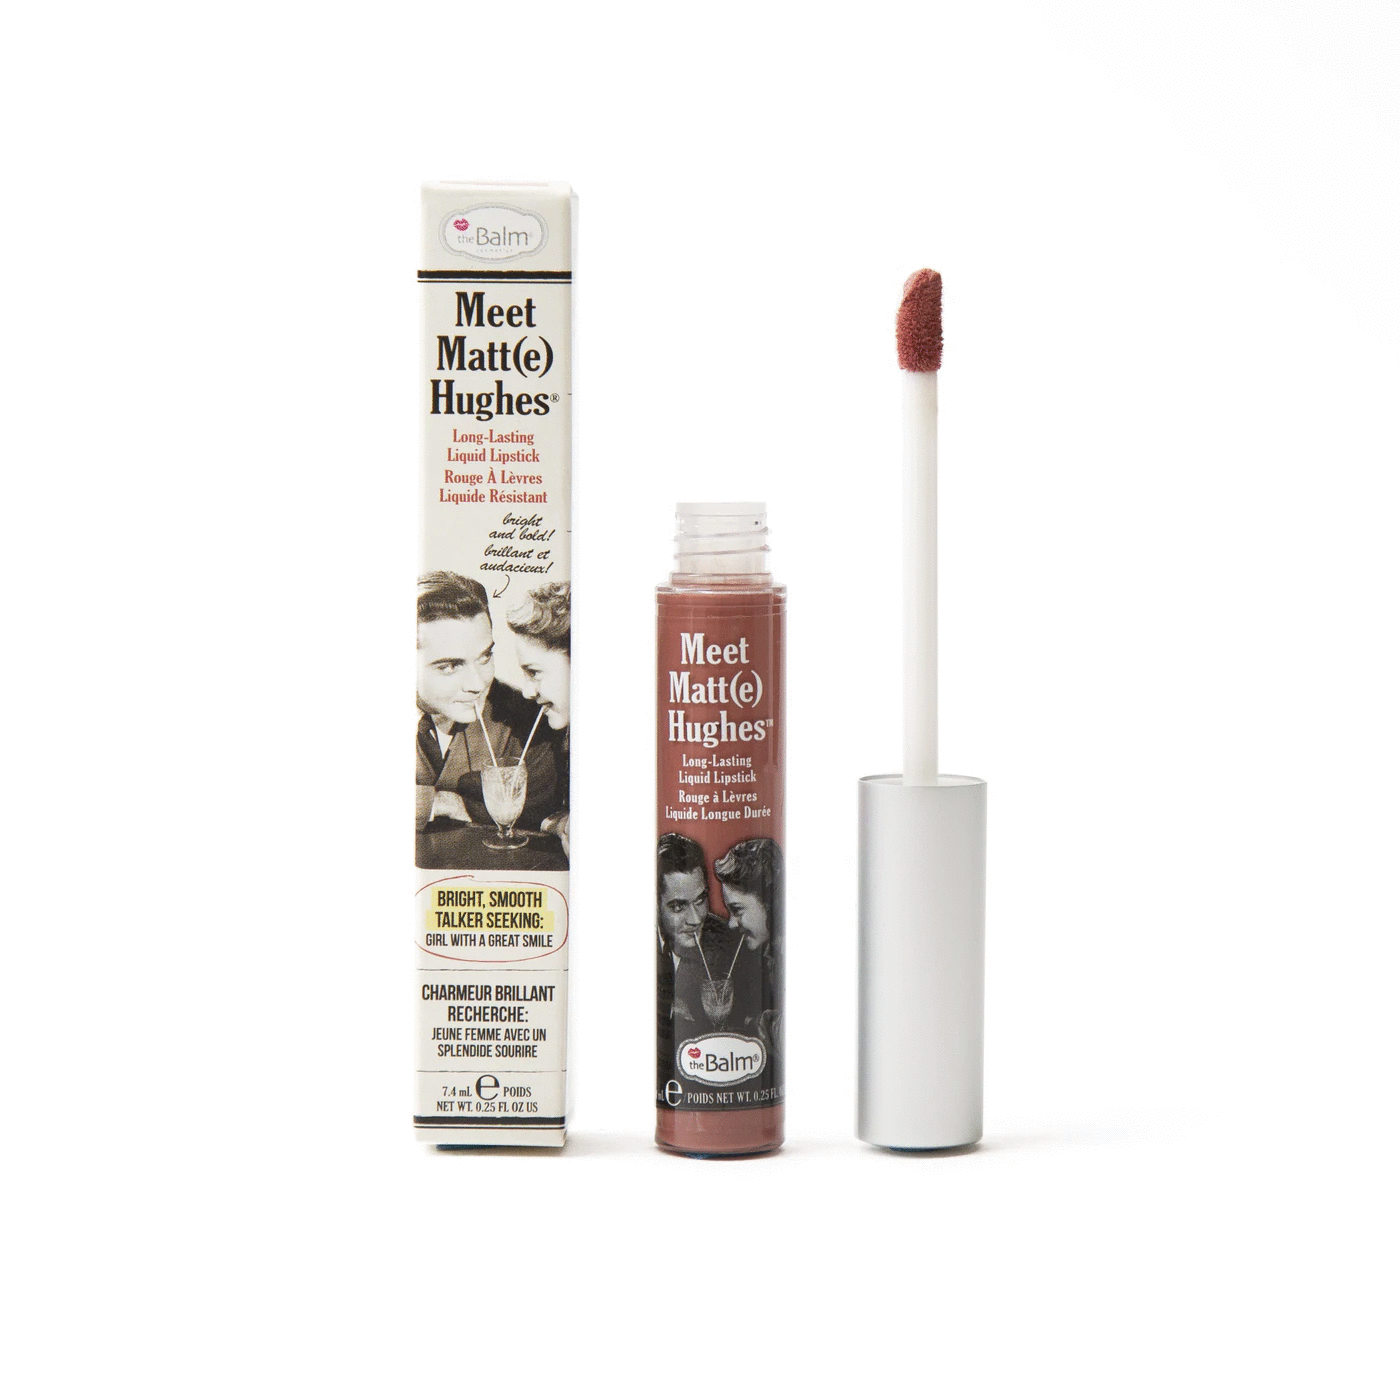 THE BALM MEET MATTE HUGHES COMMITTED